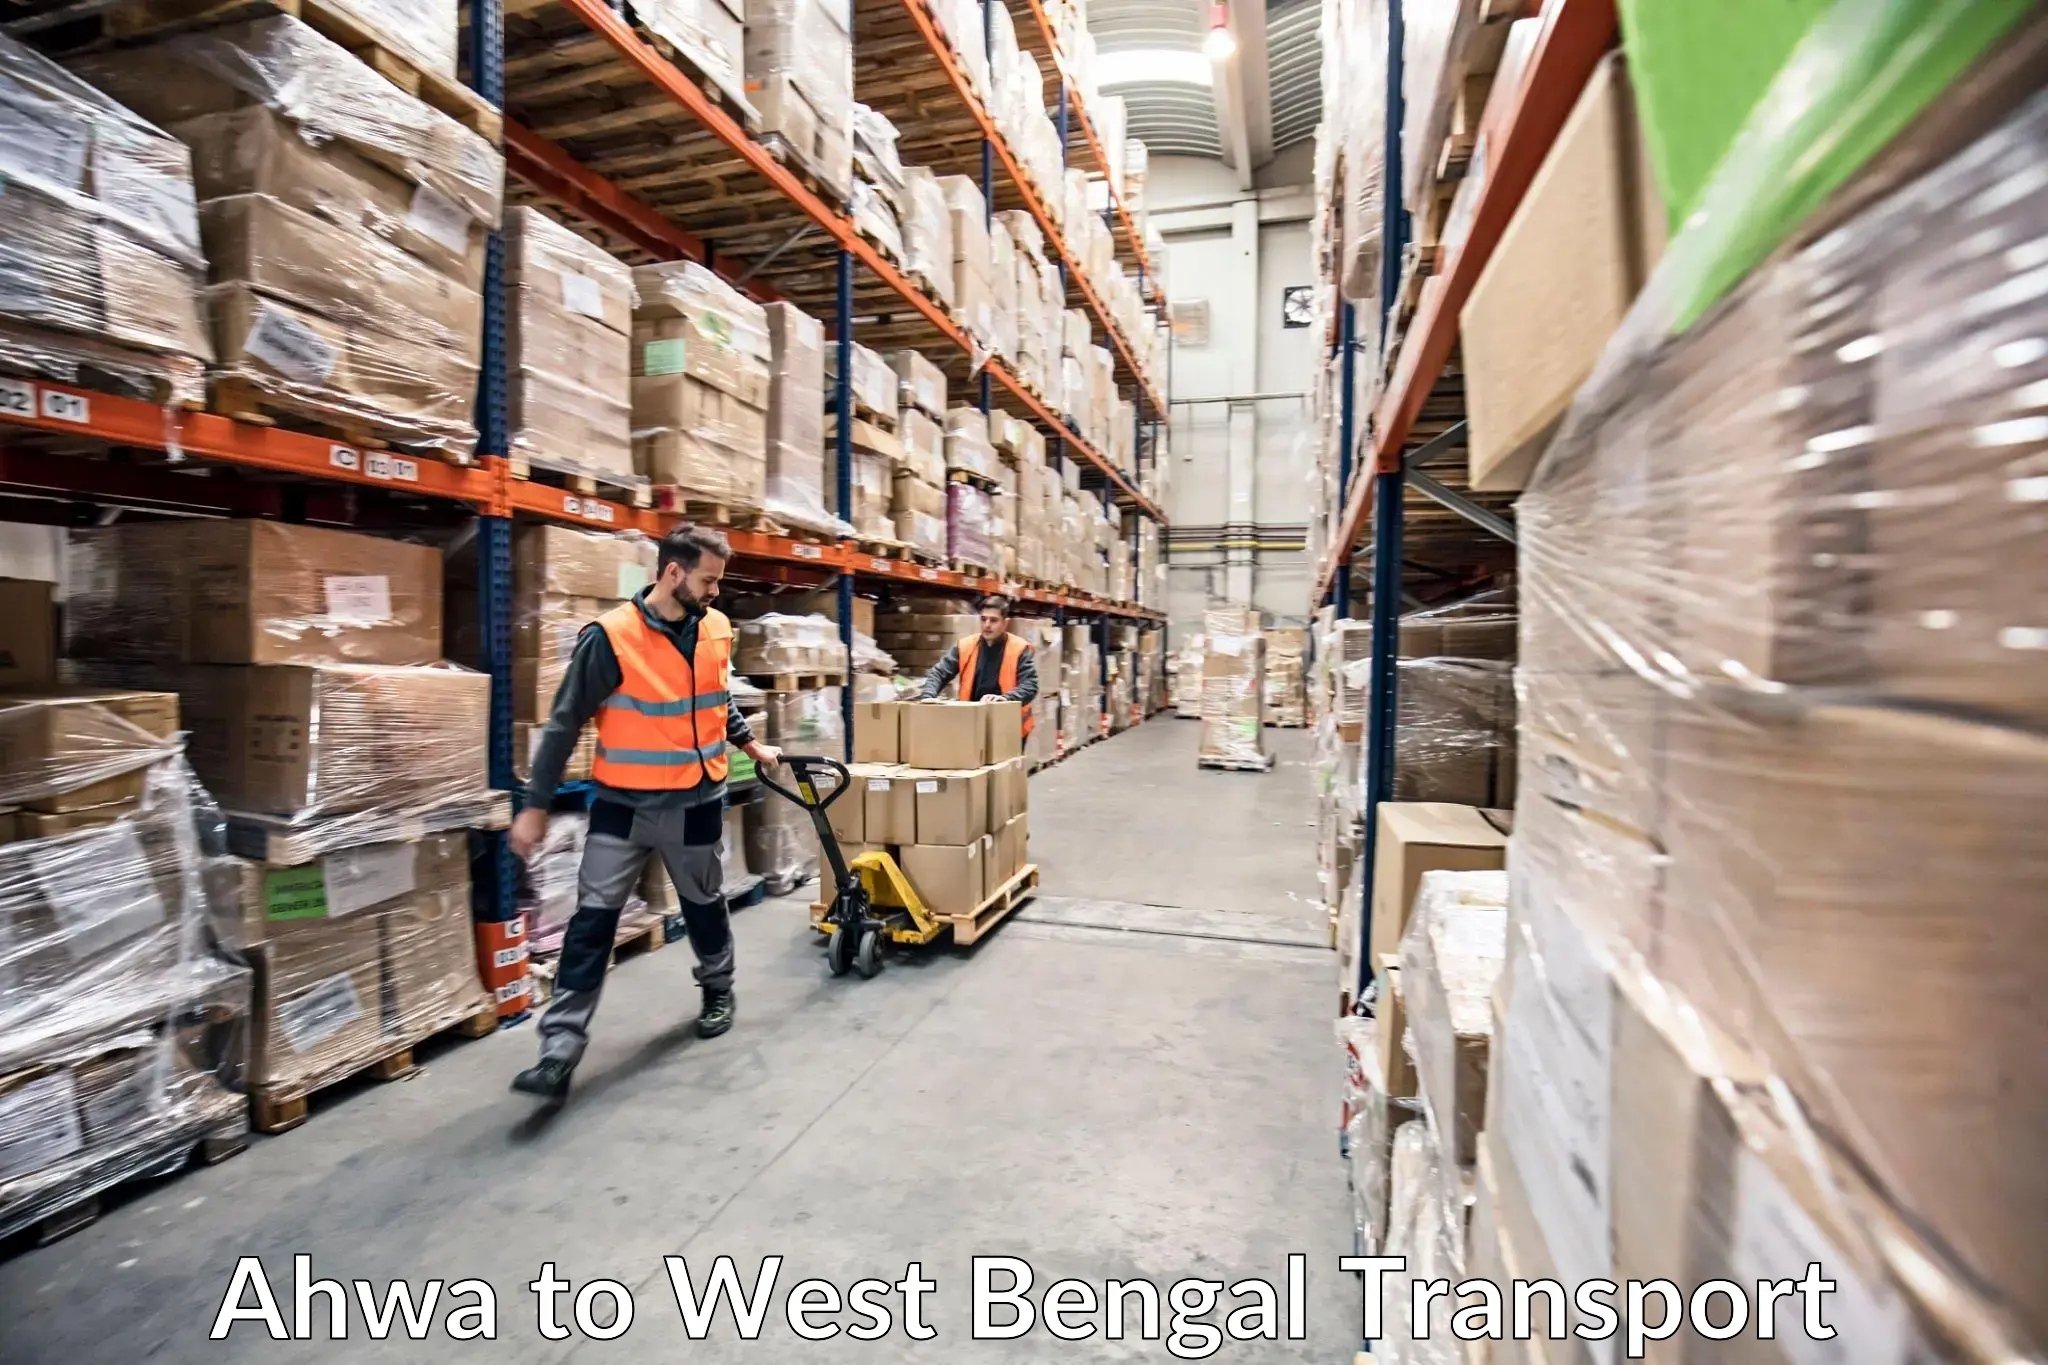 Shipping partner Ahwa to West Bengal